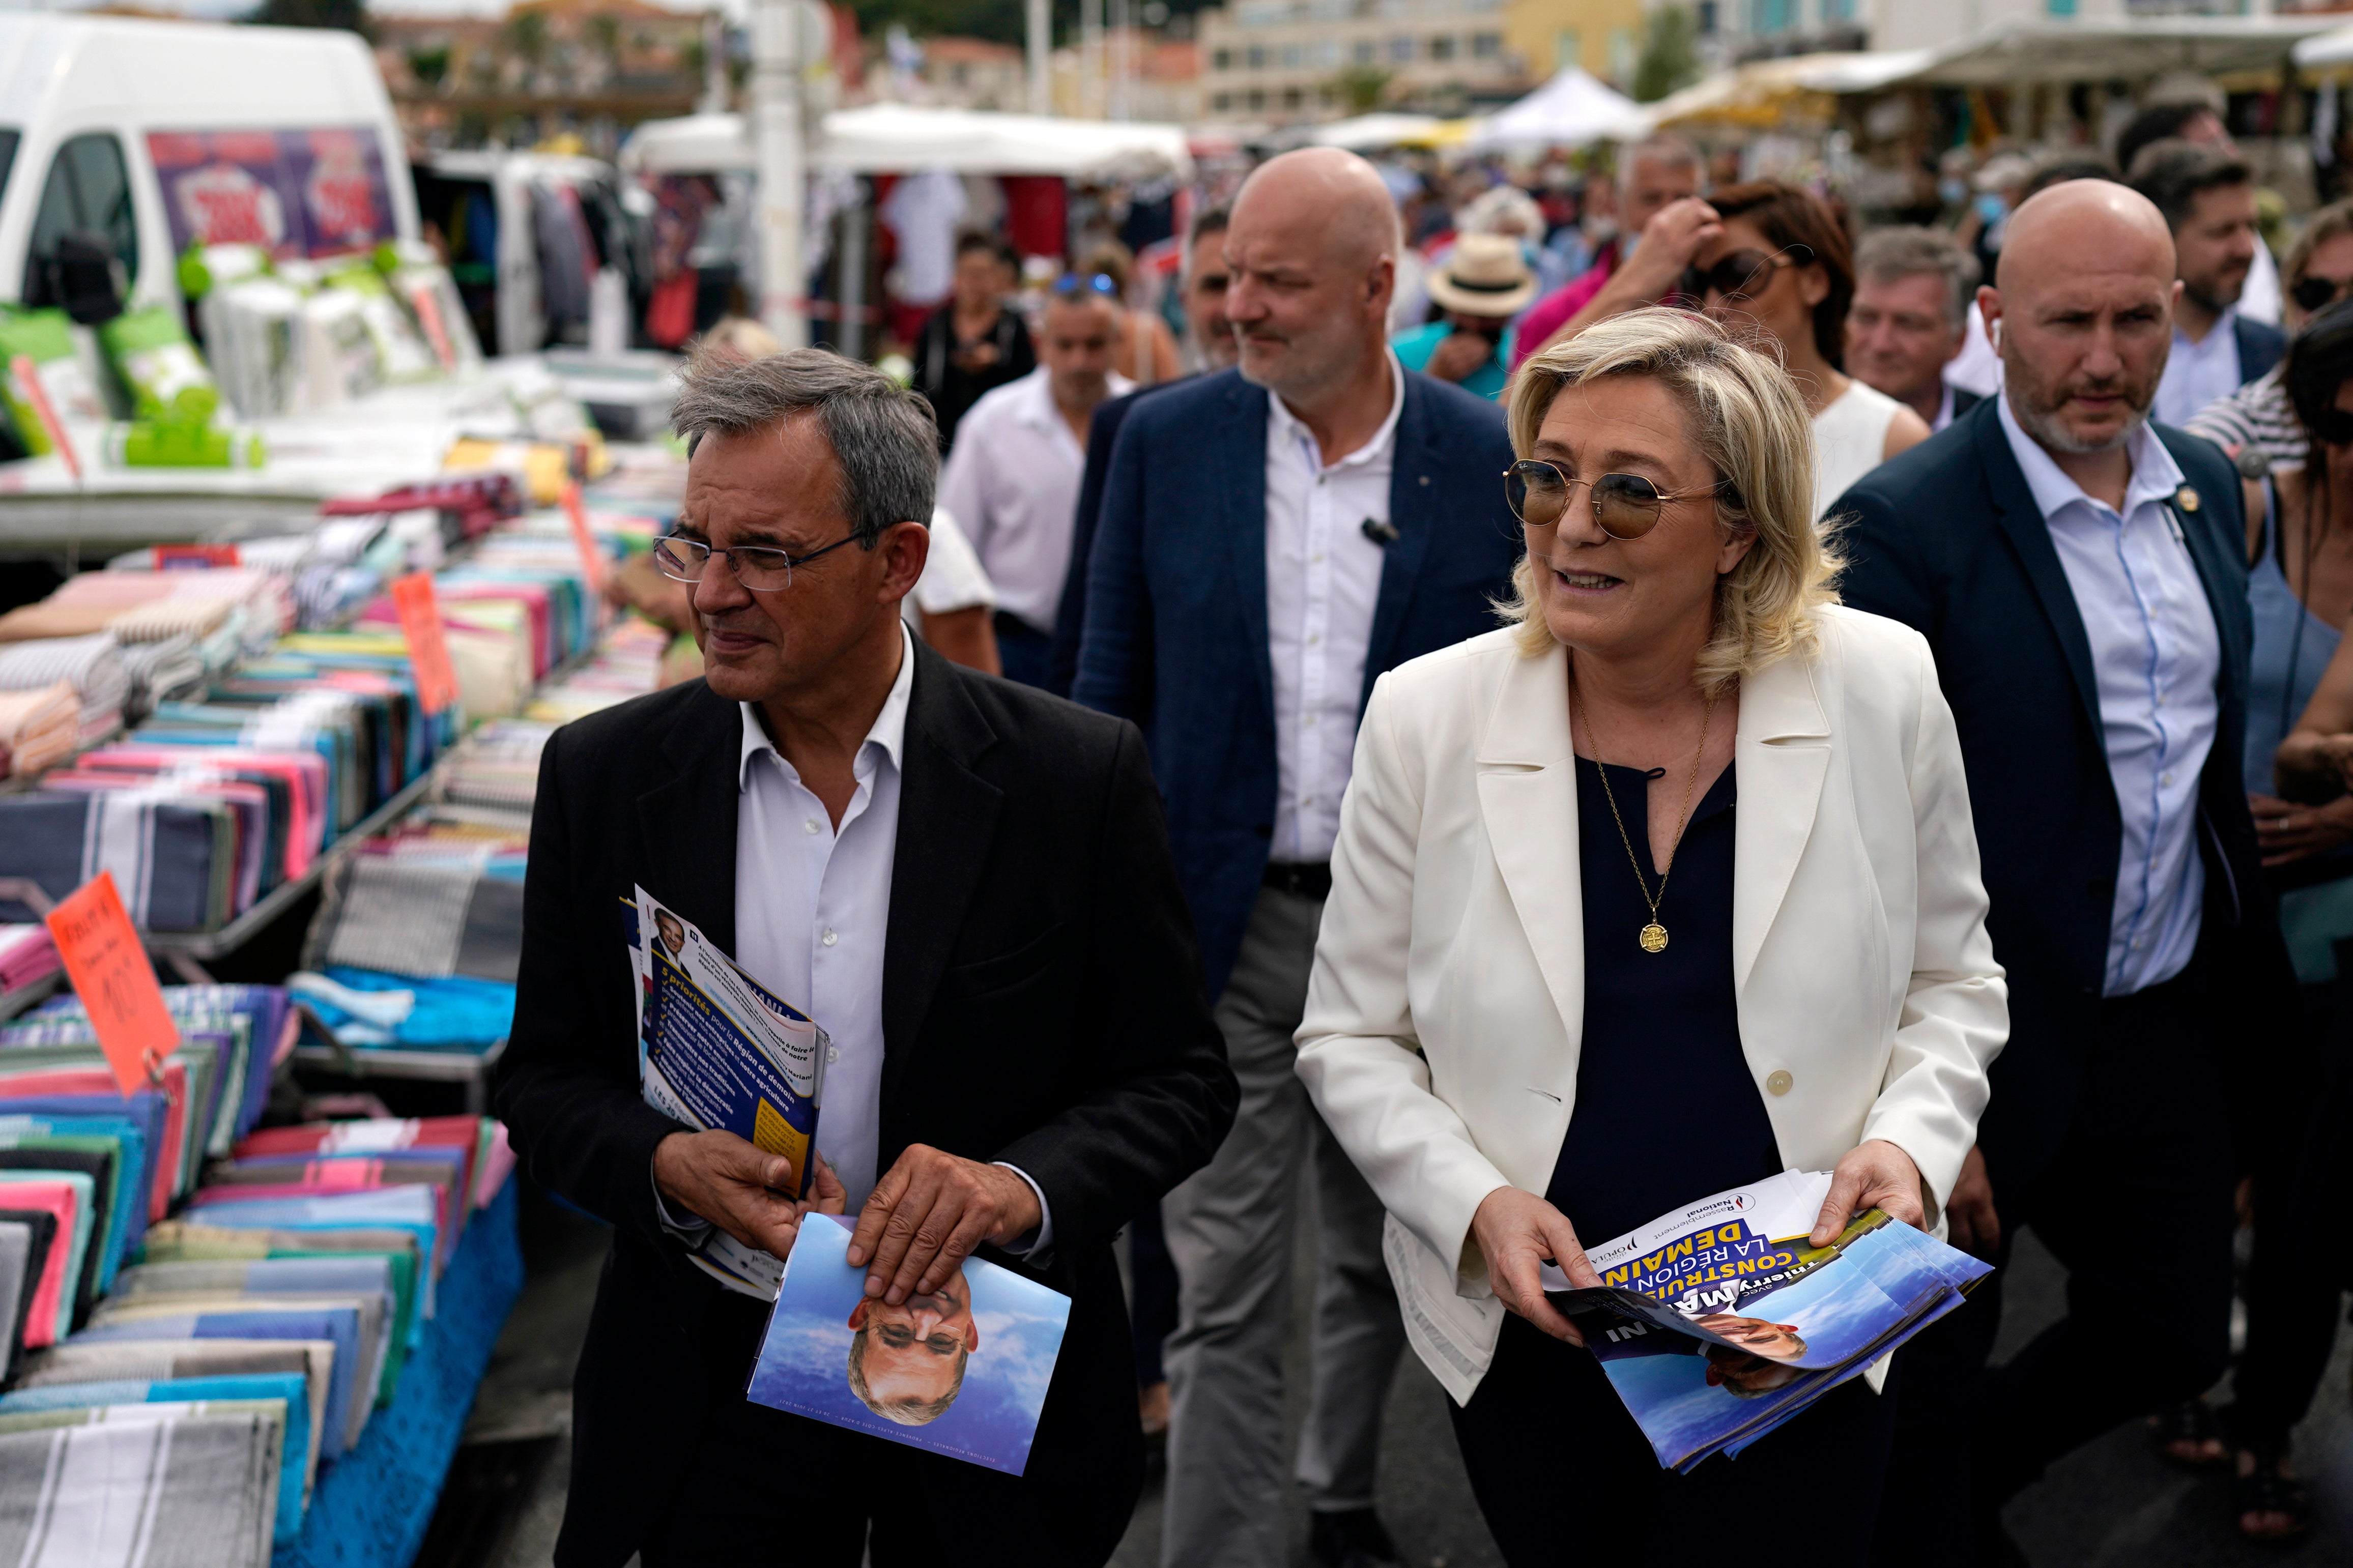 Far-right leader Marine le Pen, right, and local candidate Thierry Mariani, left, campaign in Six-Fours-les-Plages, southern France